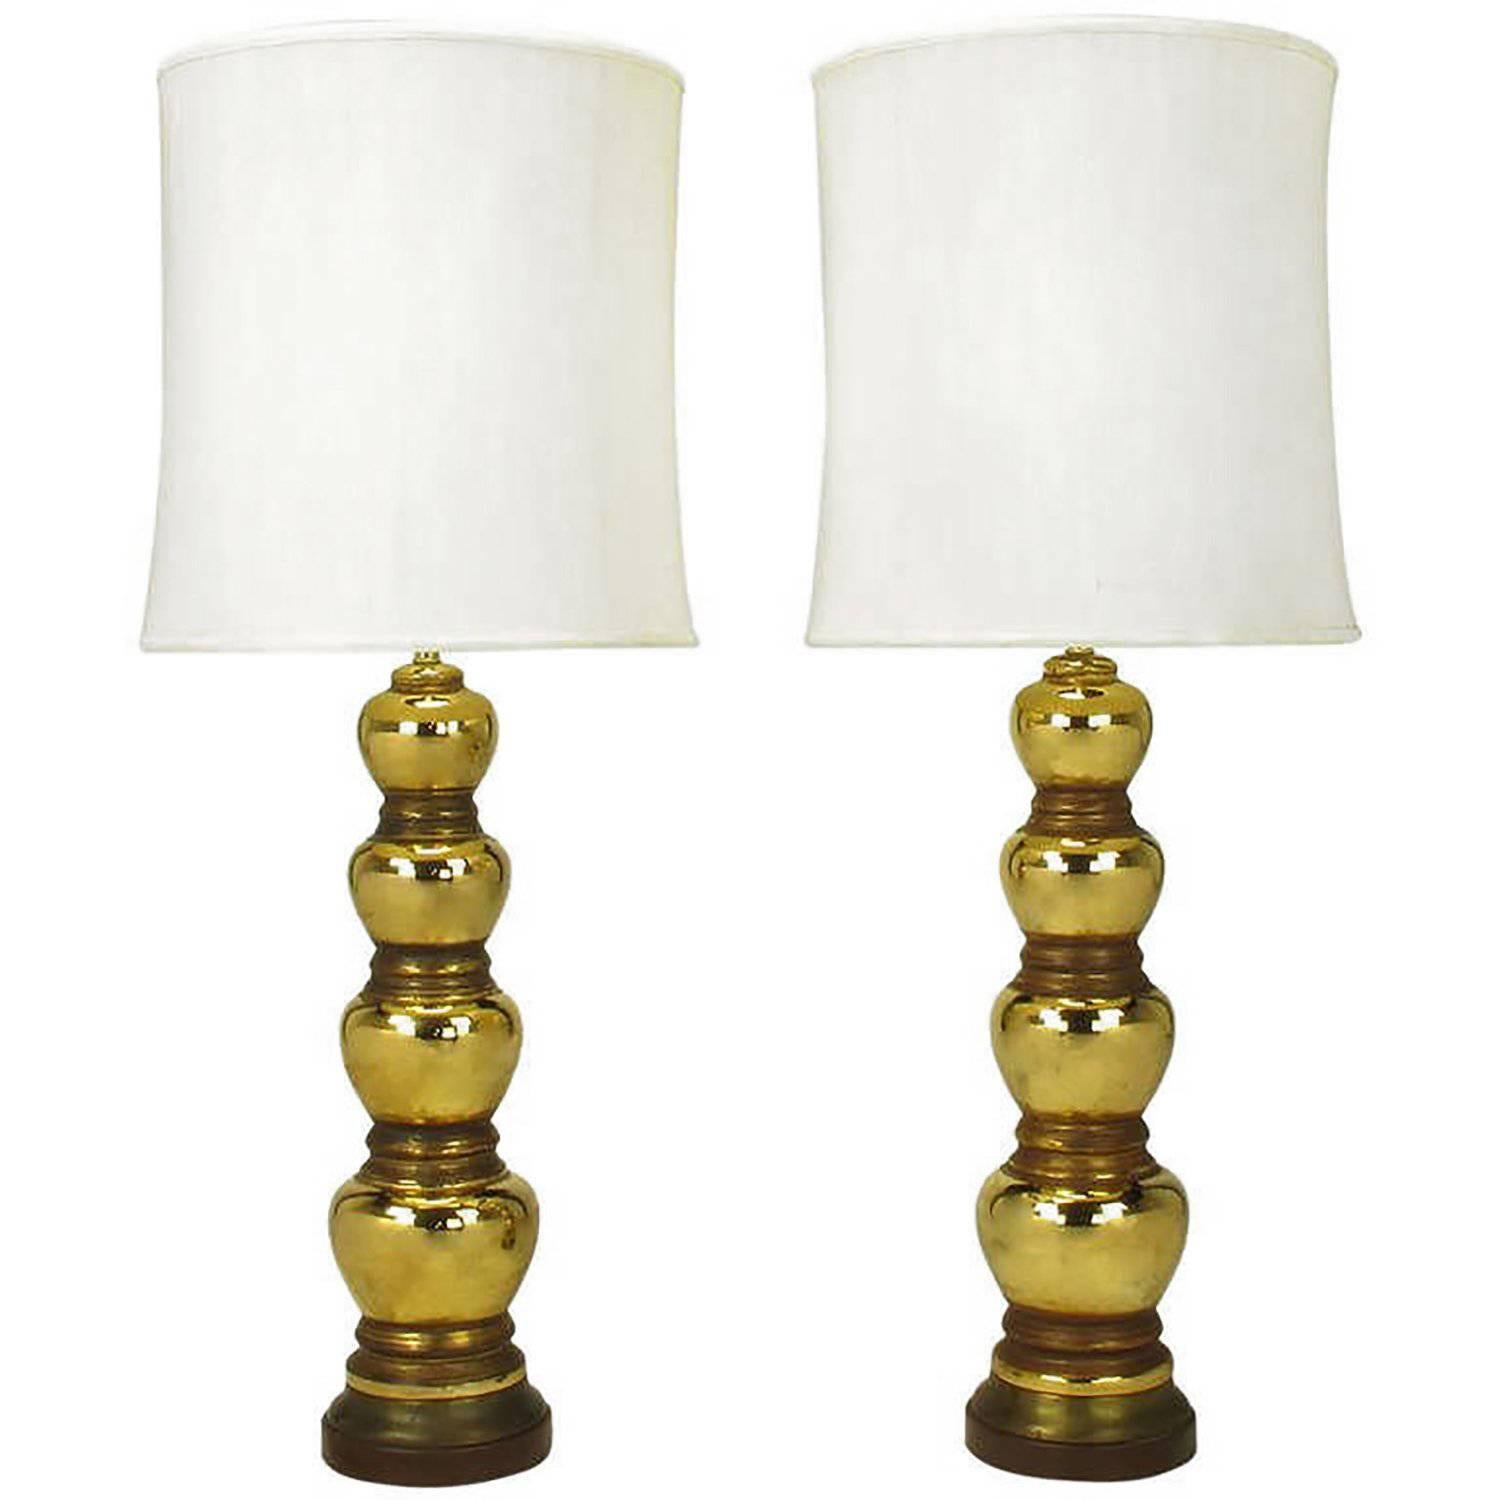 Pair of 1930s Gold-Plated Mirror Glazed Porcelain Quadruple Gourd Table Lamps For Sale